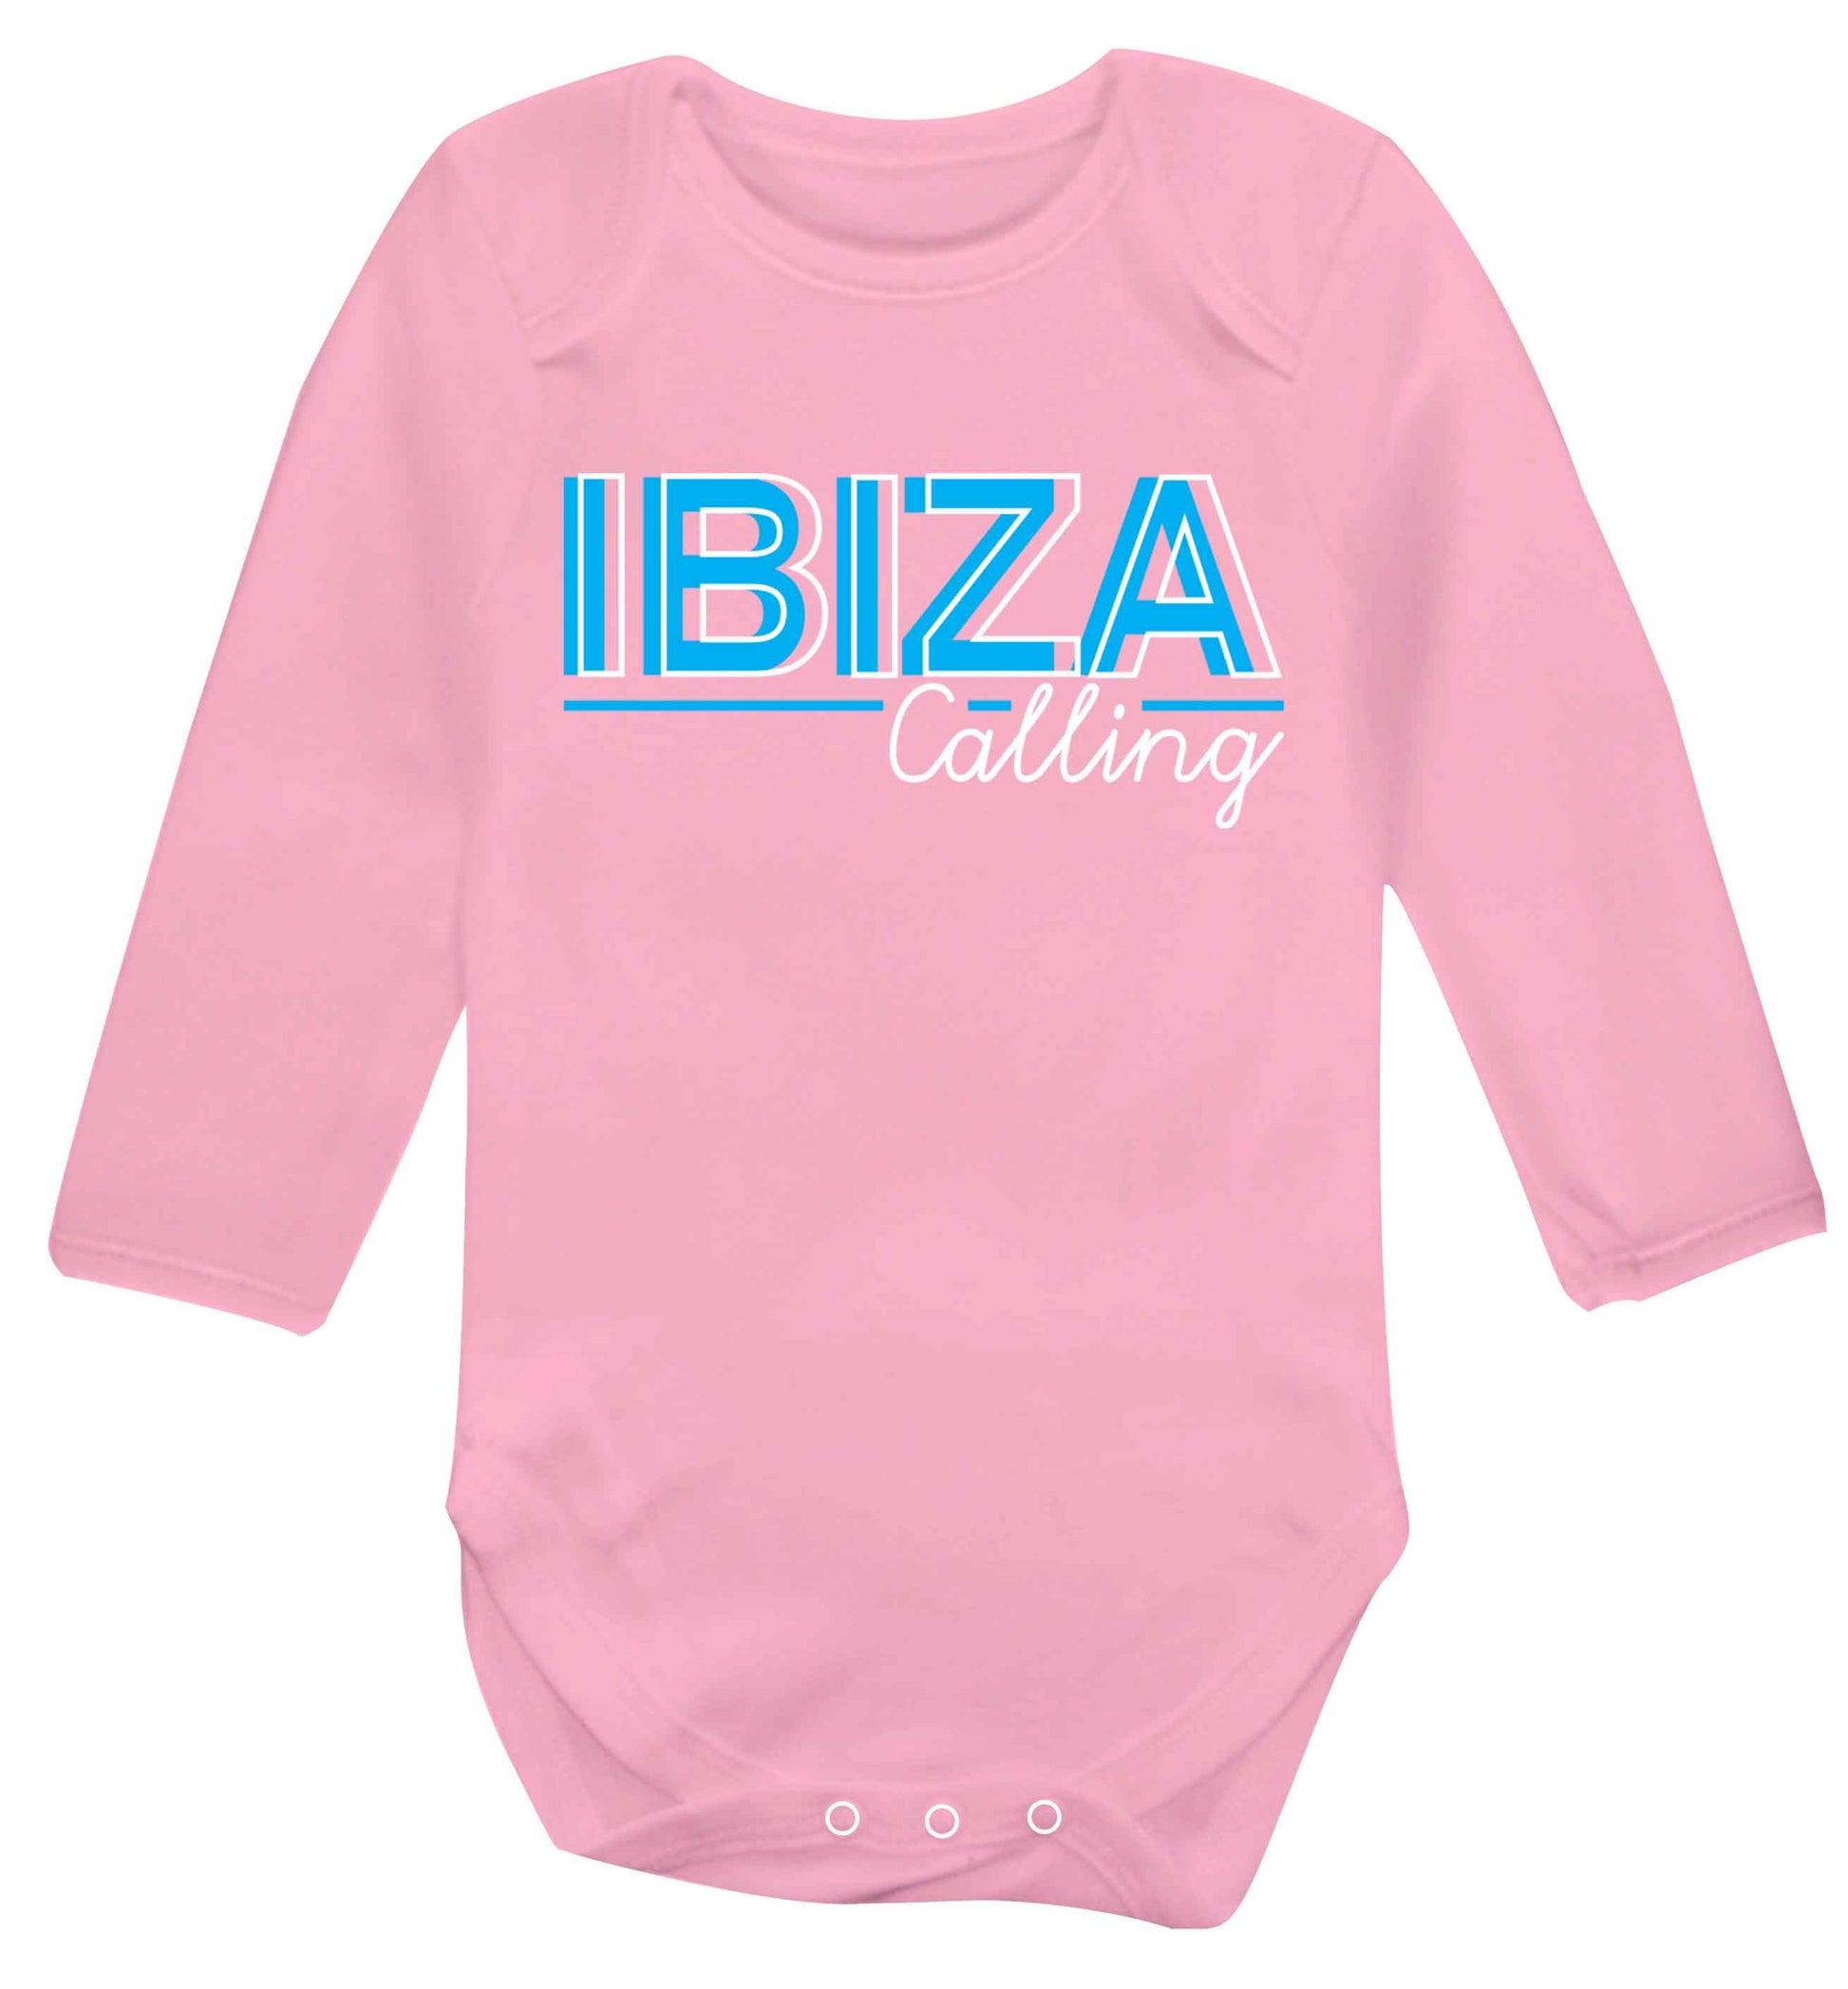 Ibiza calling Baby Vest long sleeved pale pink 6-12 months